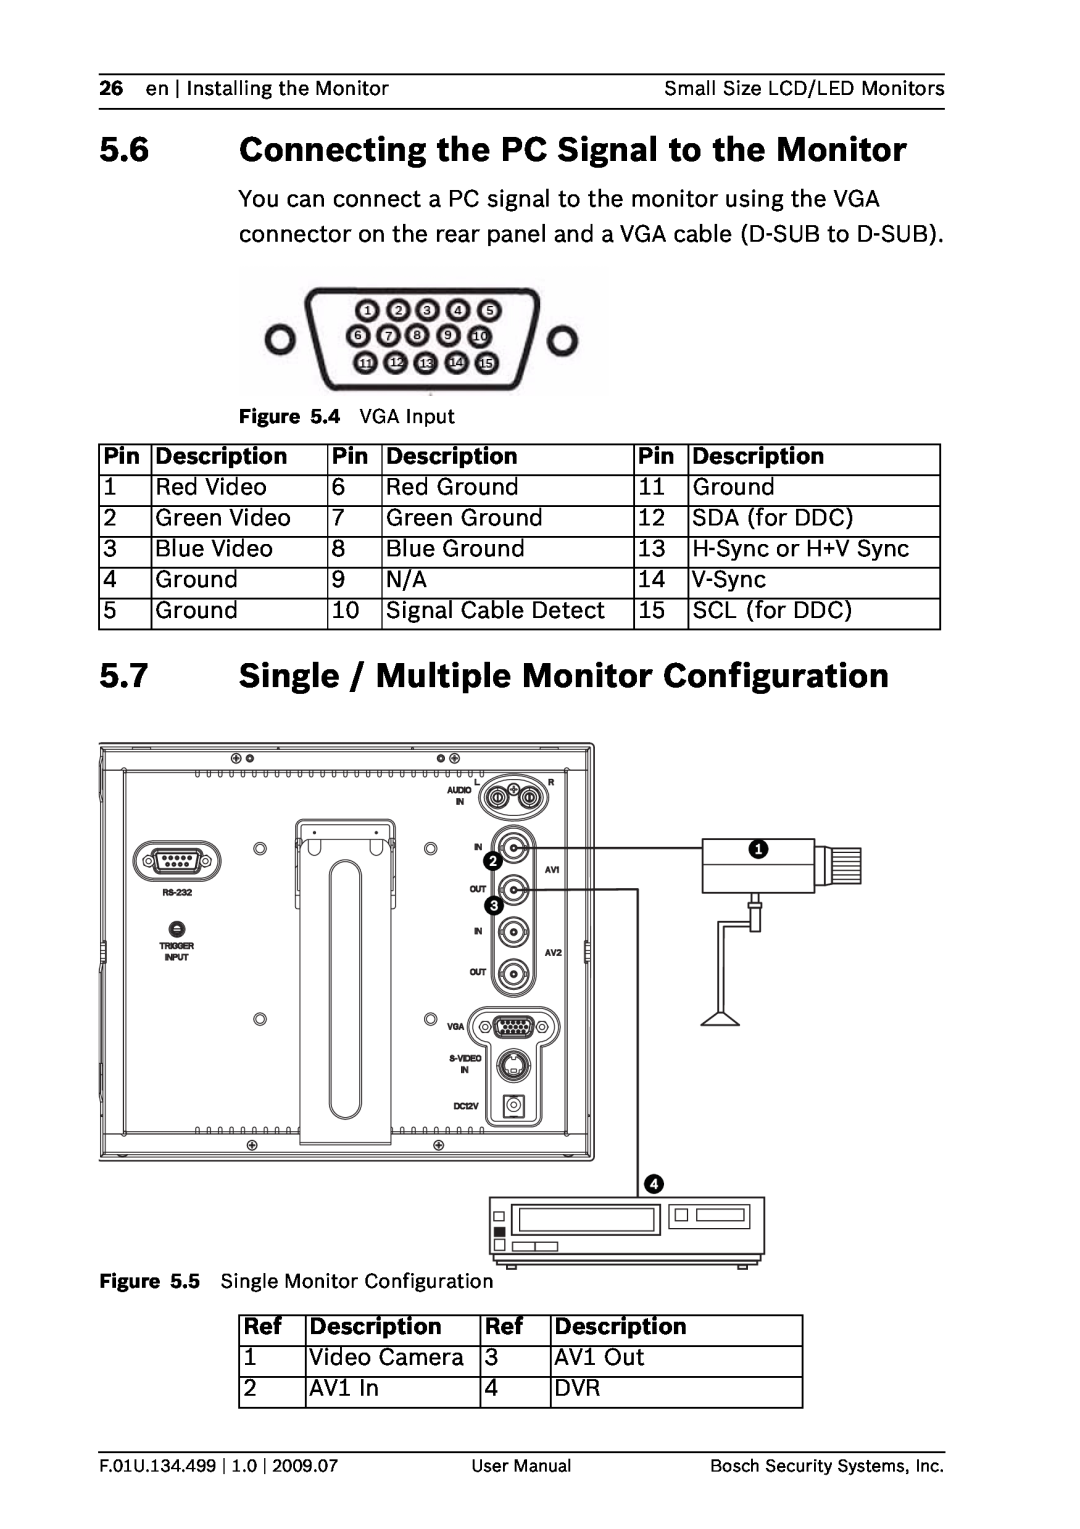 Bosch Appliances UML-080-90 Connecting the PC Signal to the Monitor, Single / Multiple Monitor Configuration, Description 